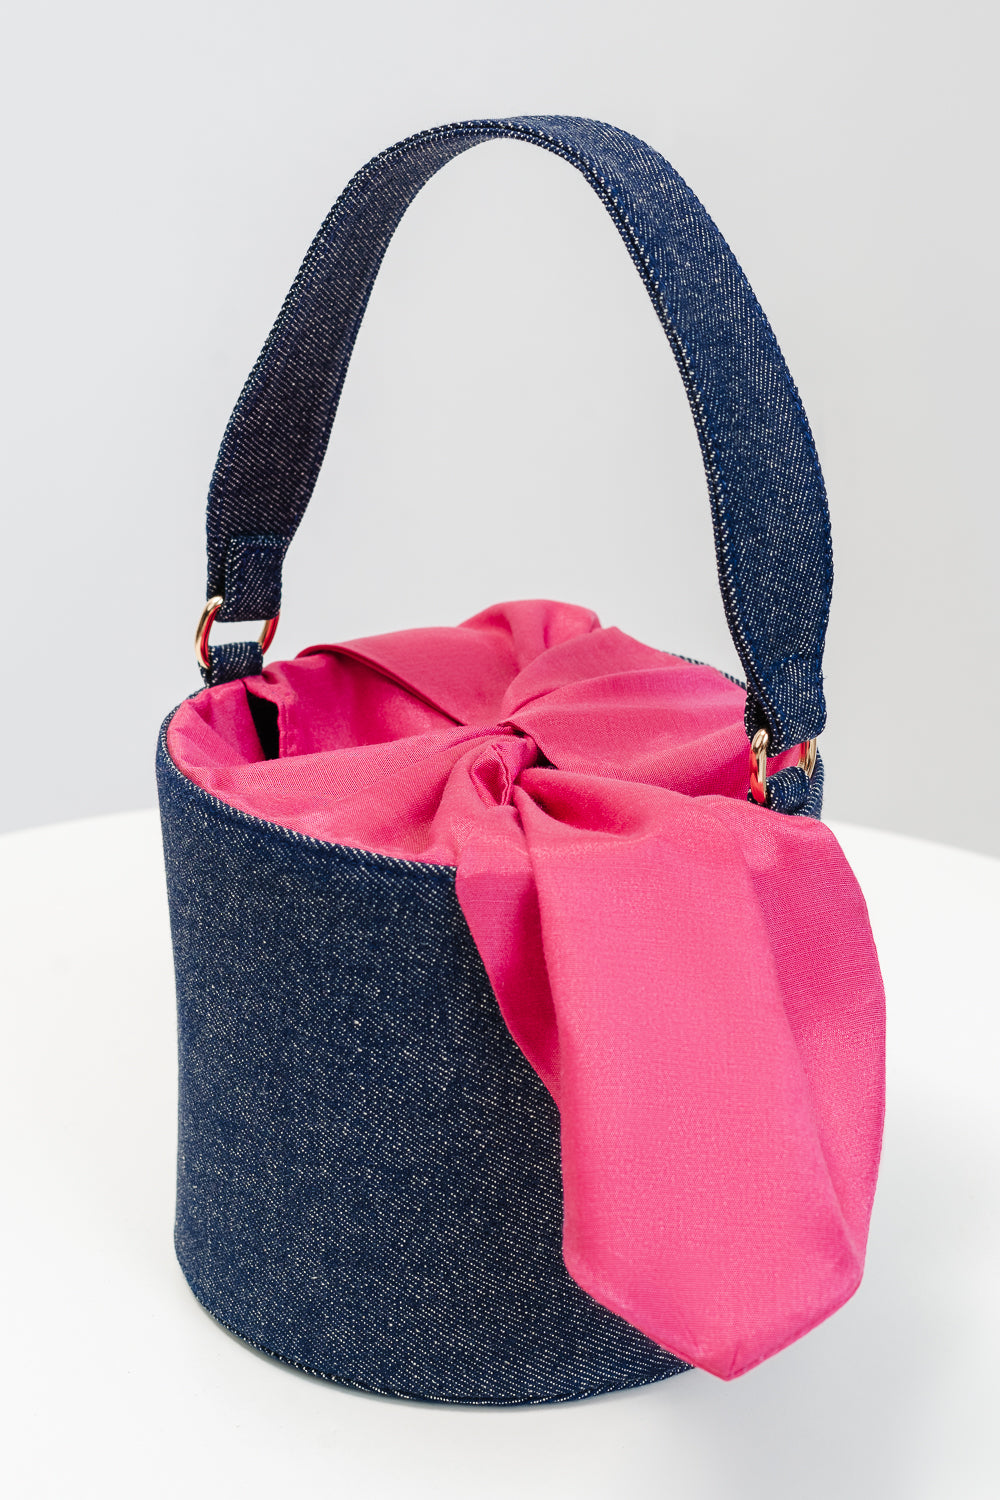 The Blue-Pink Bucket Bag